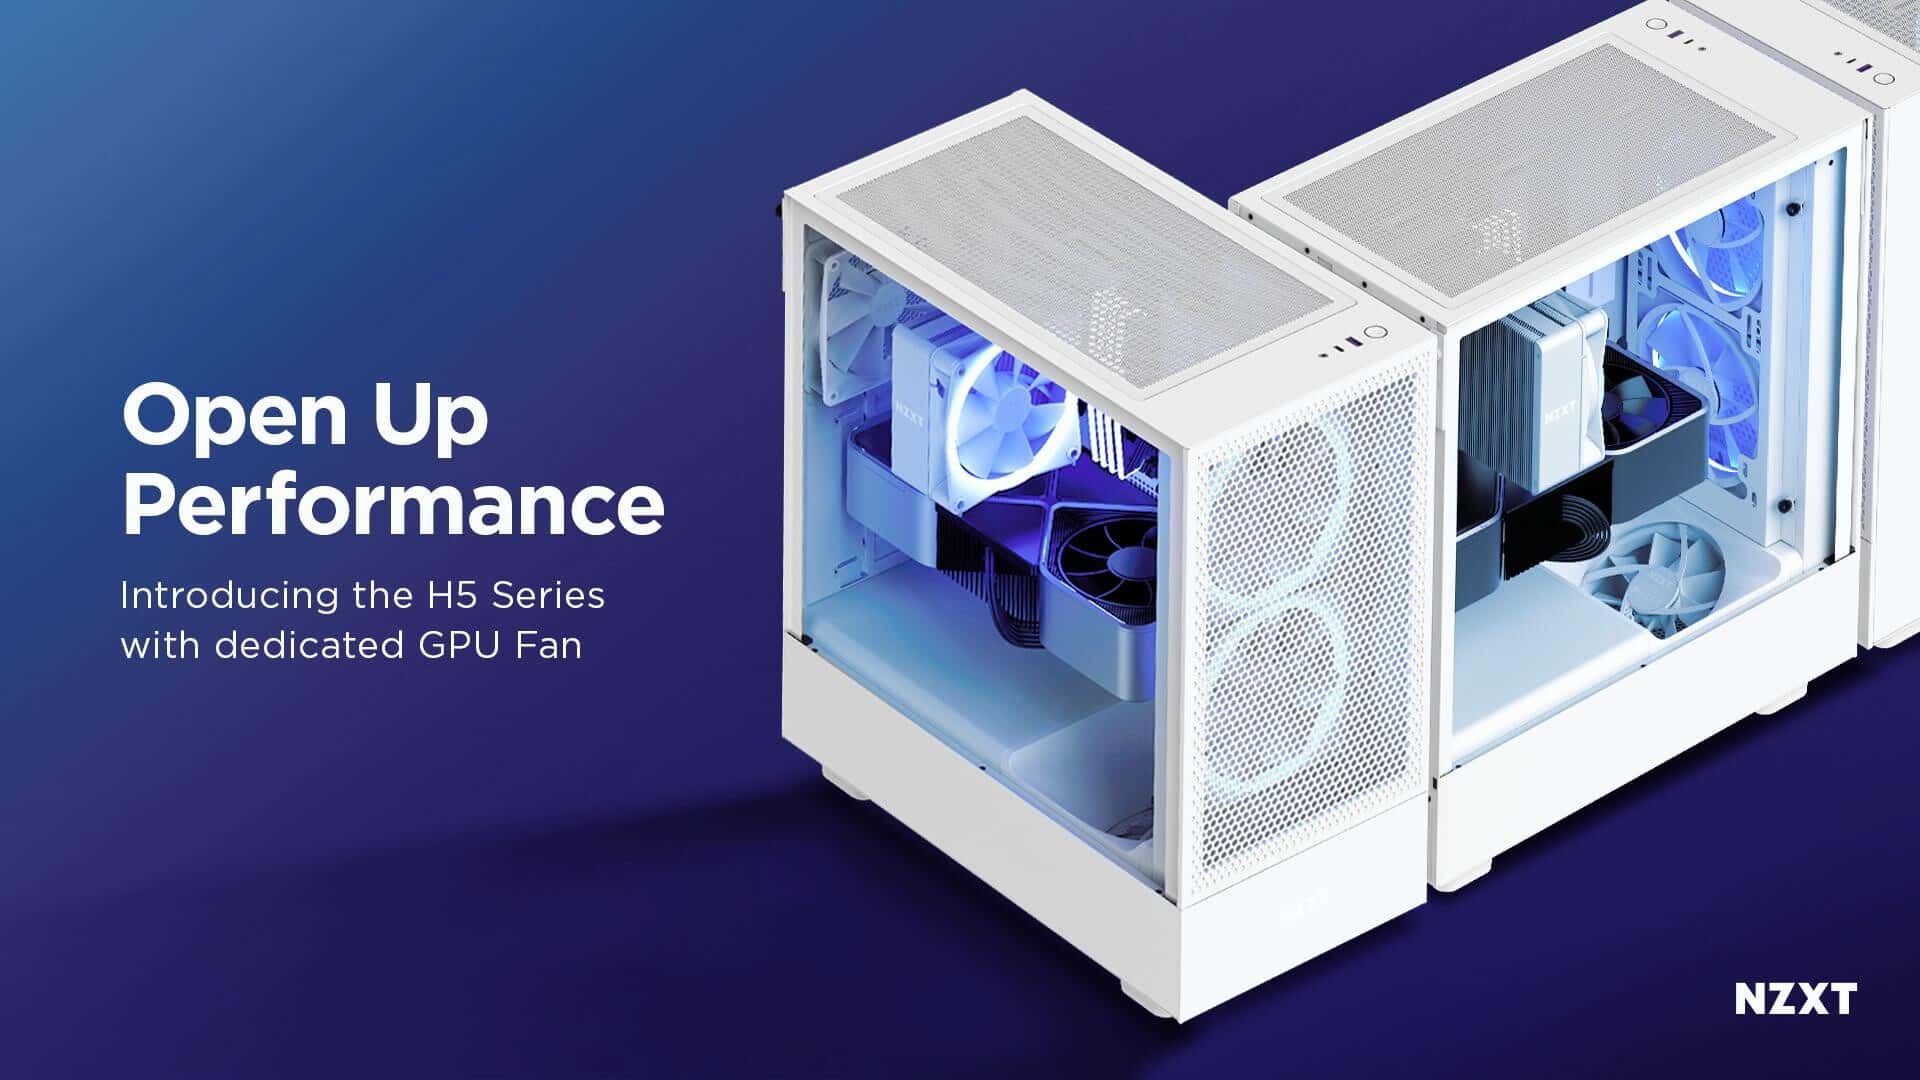 NZXT Announces the New and Improved H5 Series Cases and T120 Series of CPU Coolers